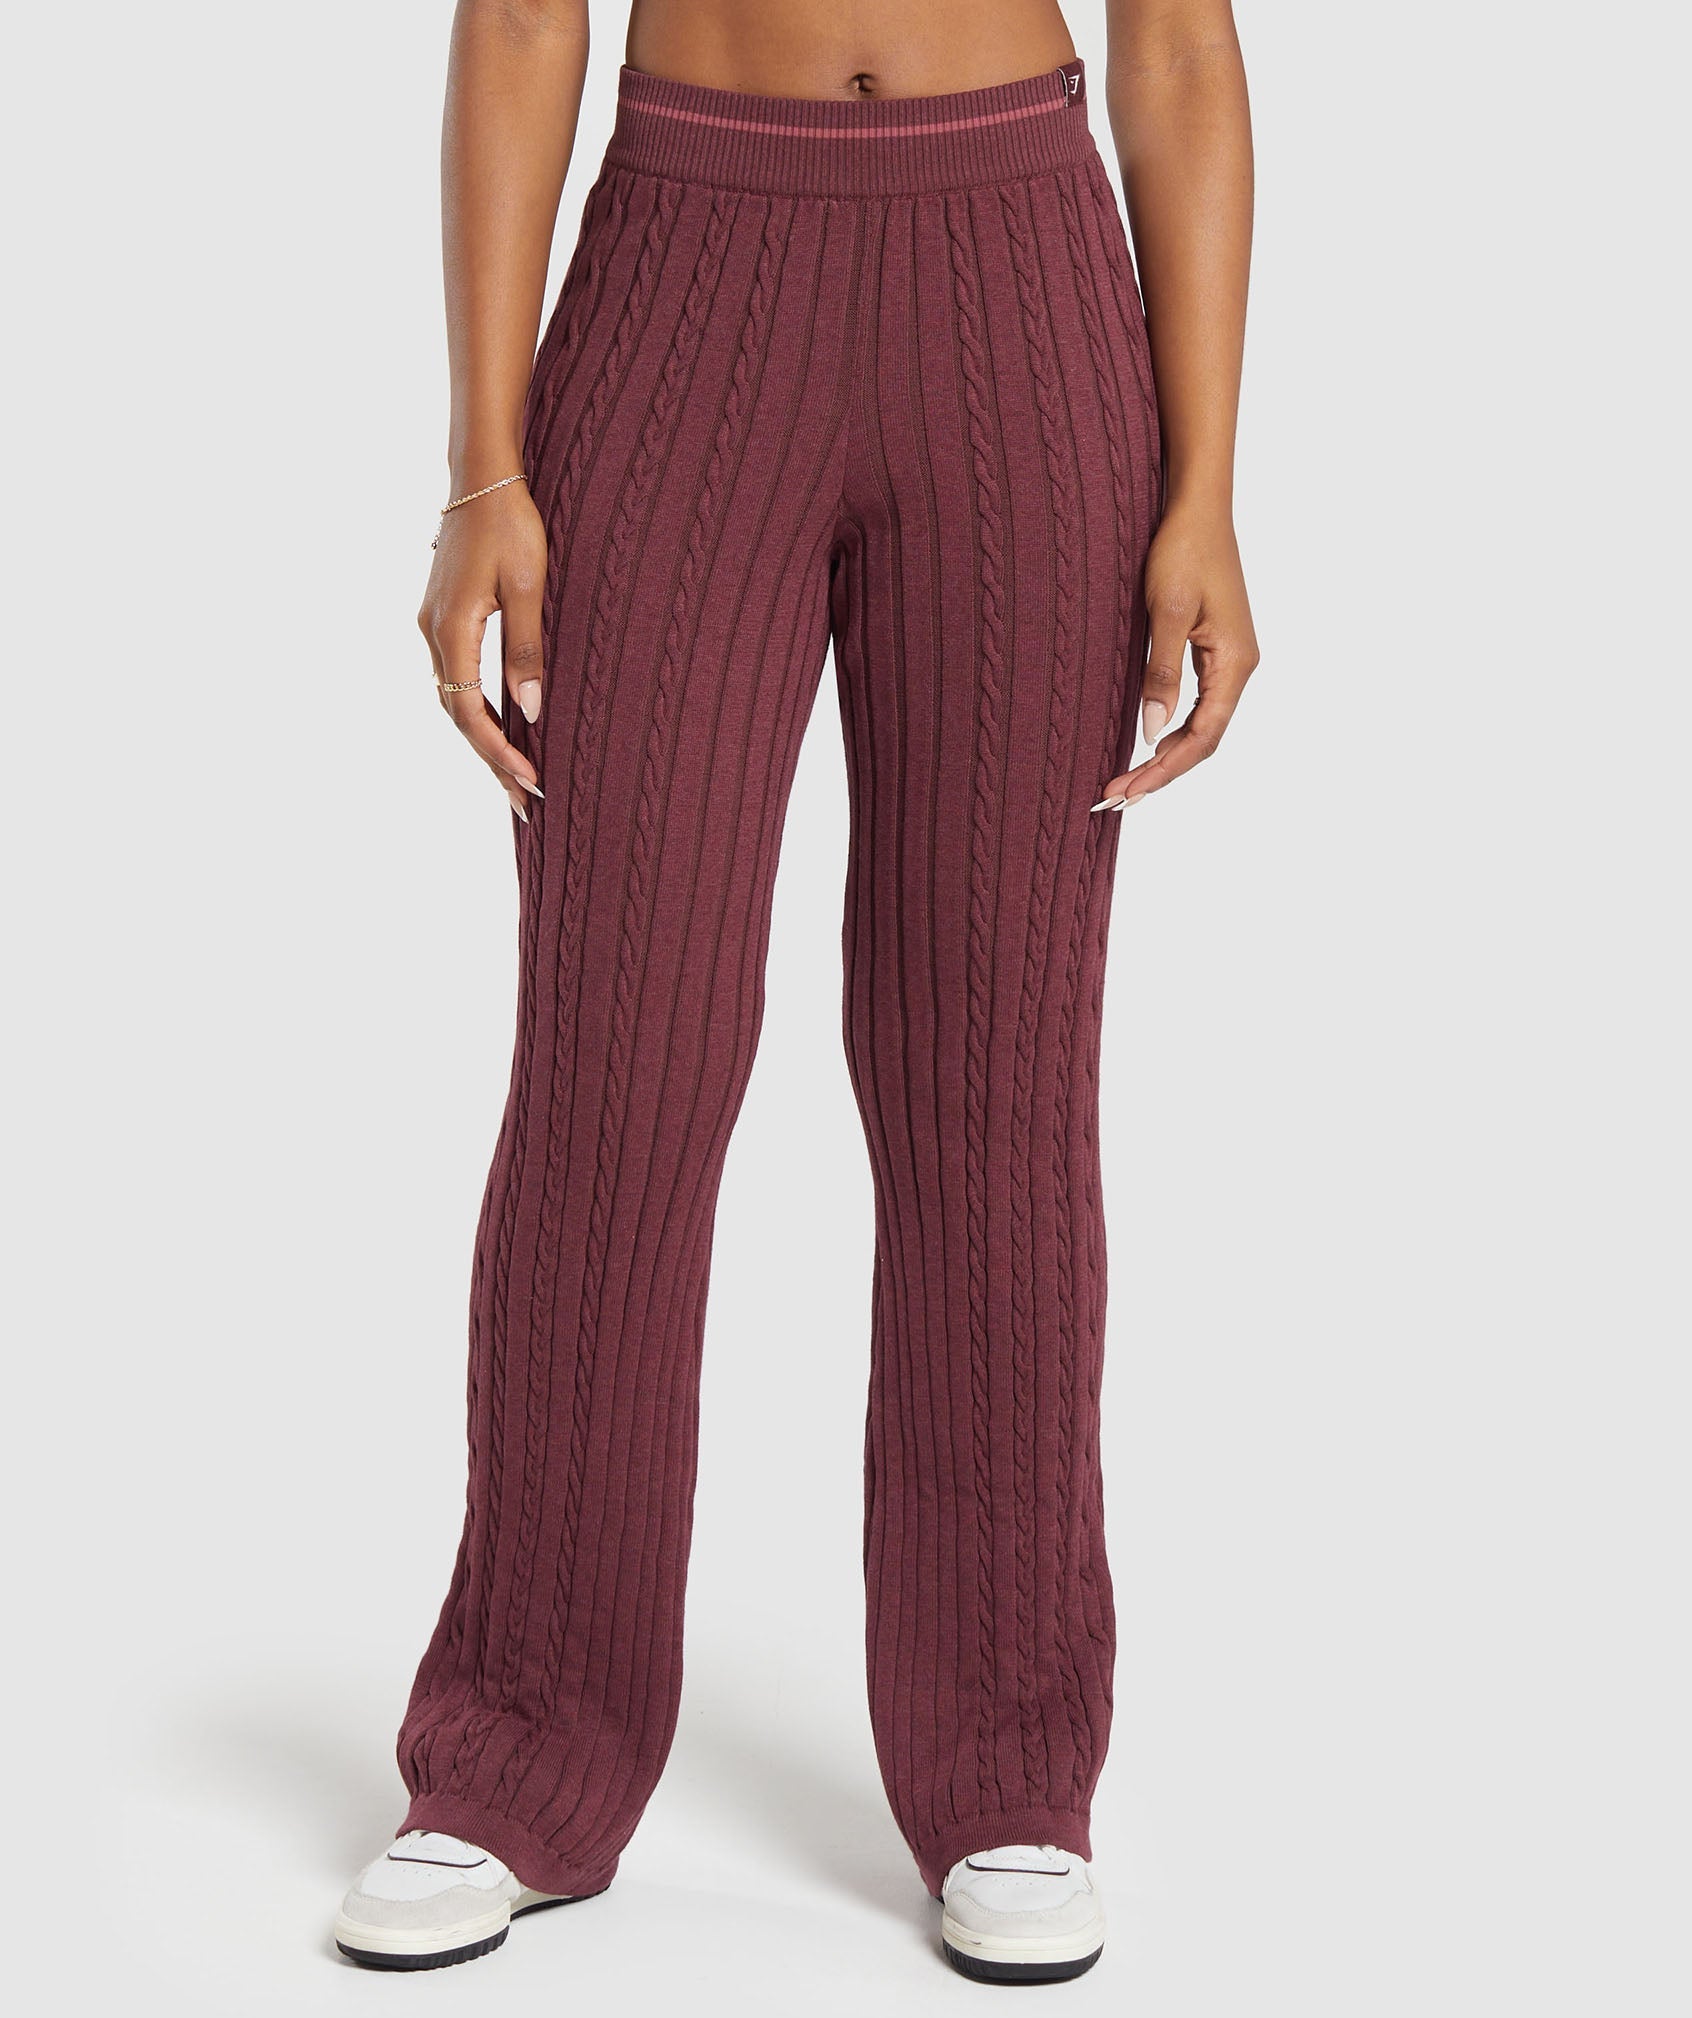 Rest Day Cable Knit Pants